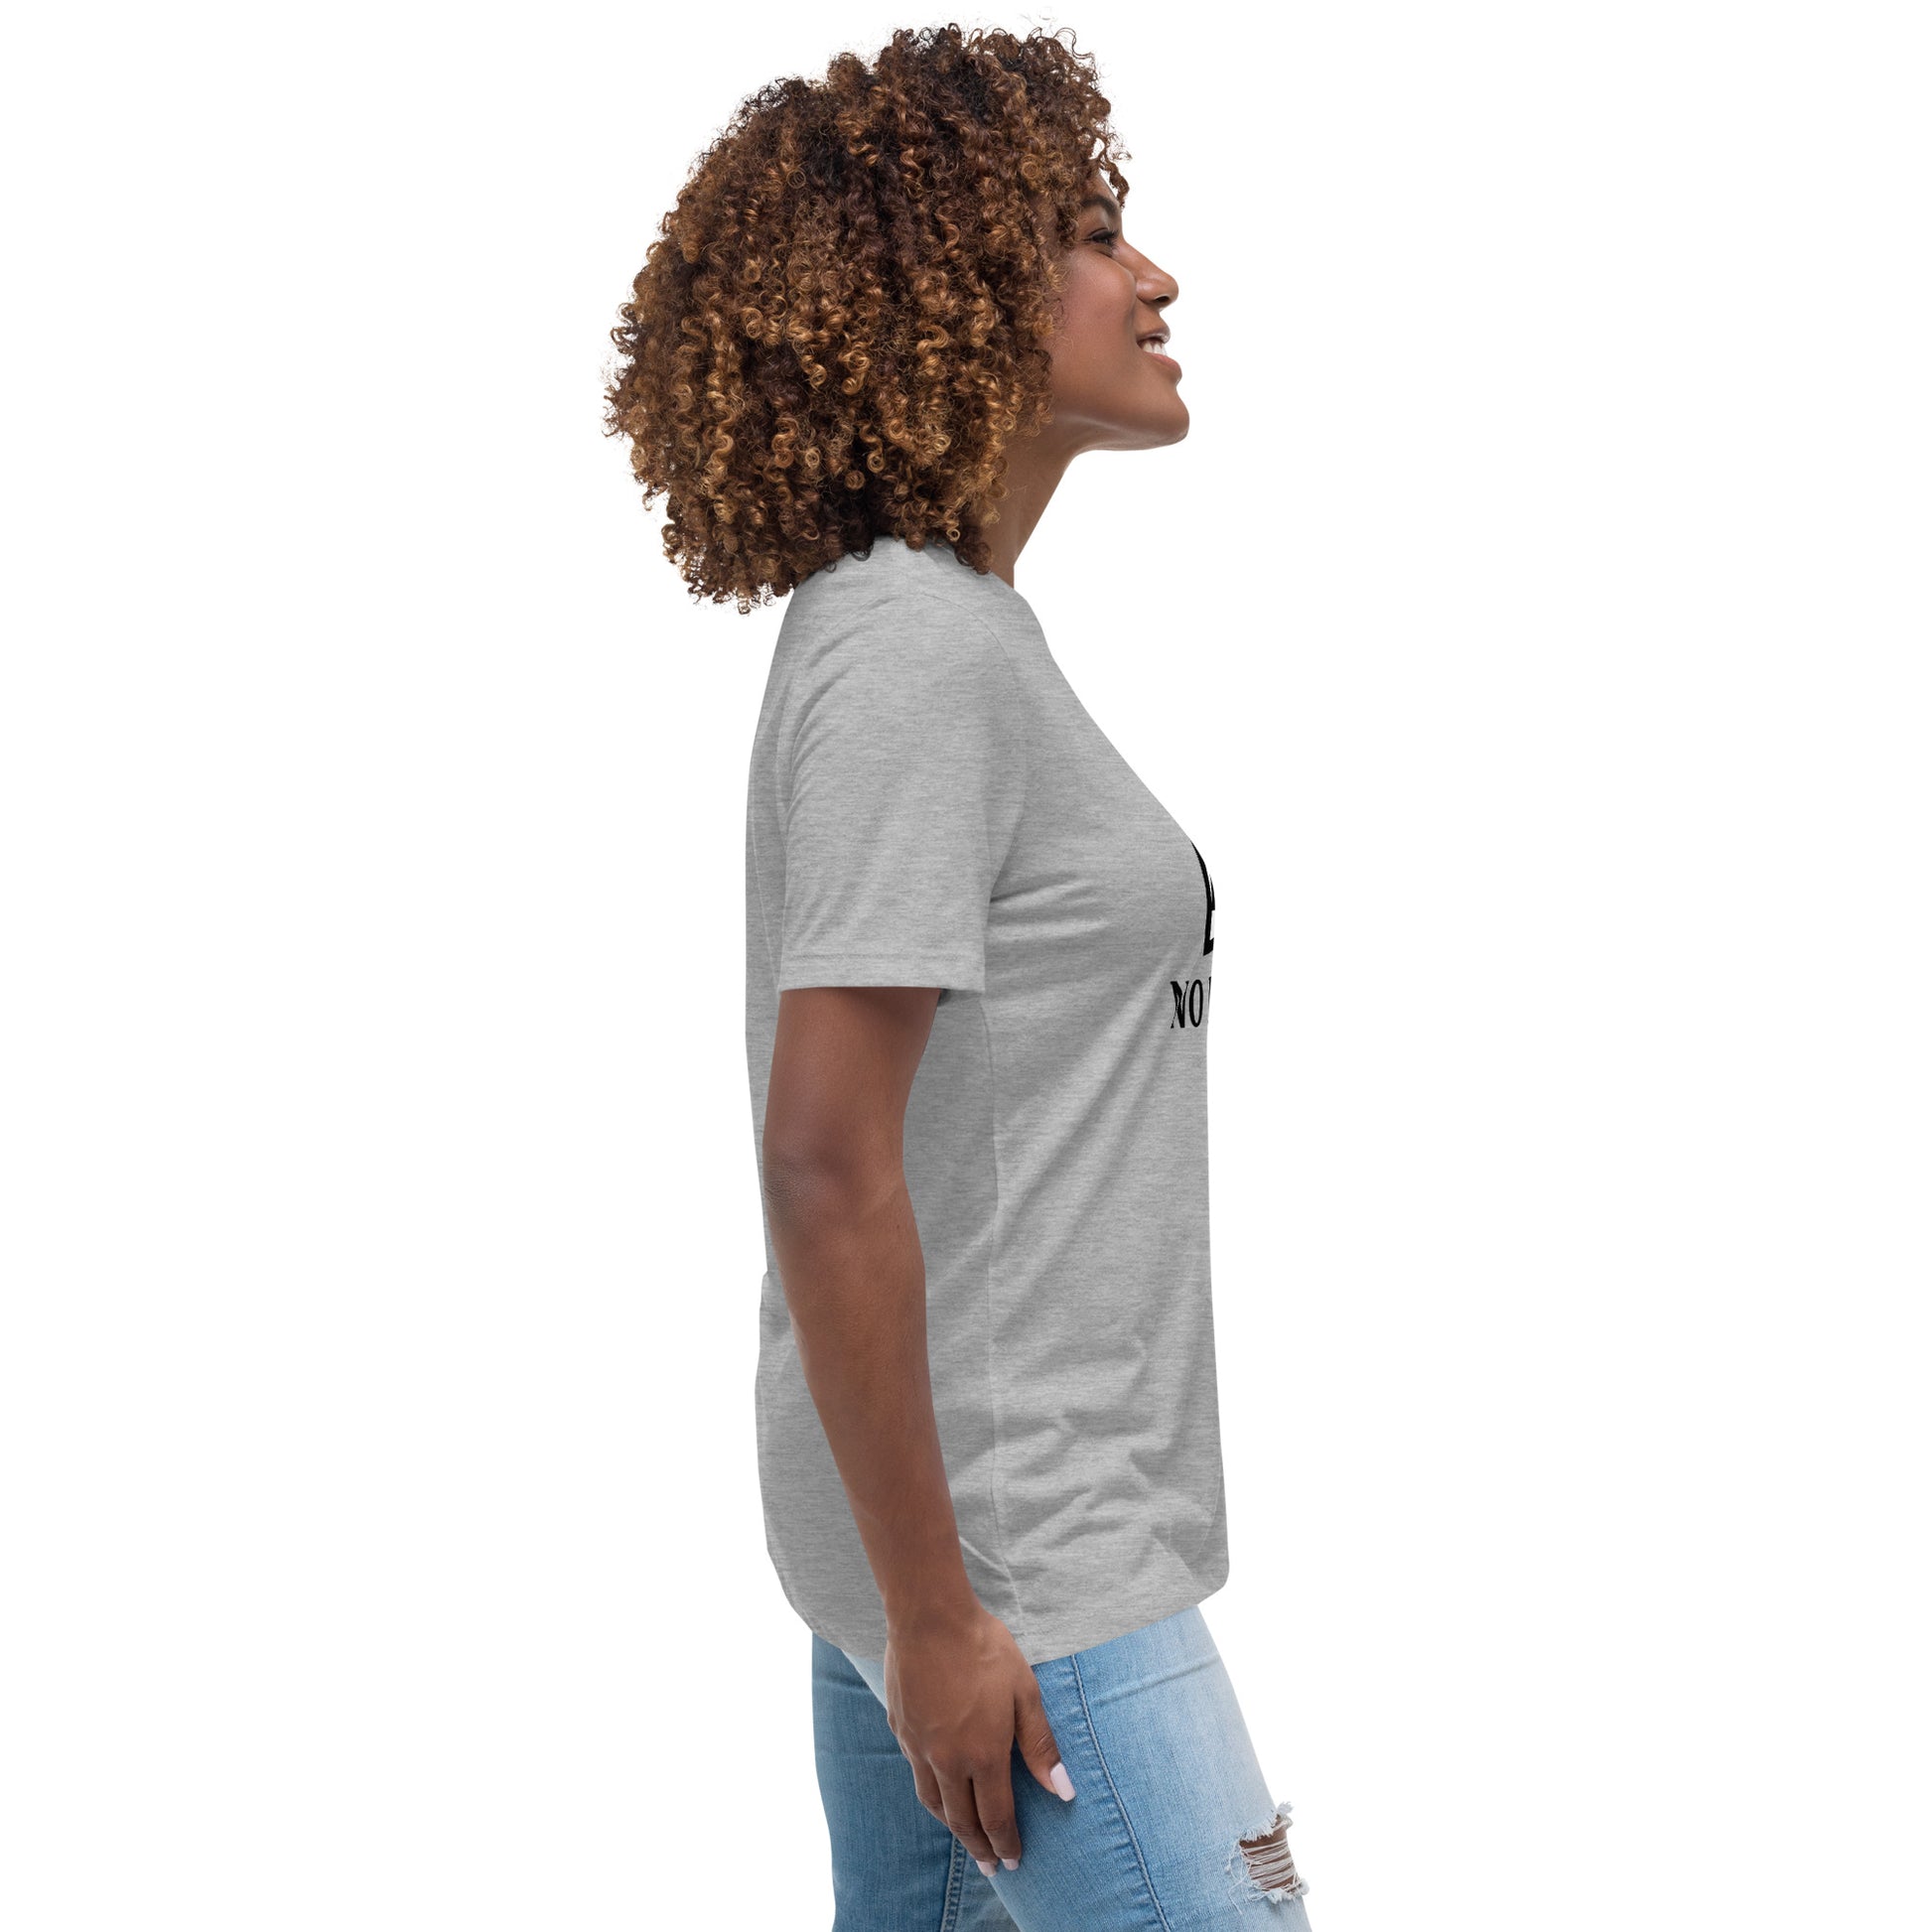 Women with grey t-shirt with image and text "no image available"